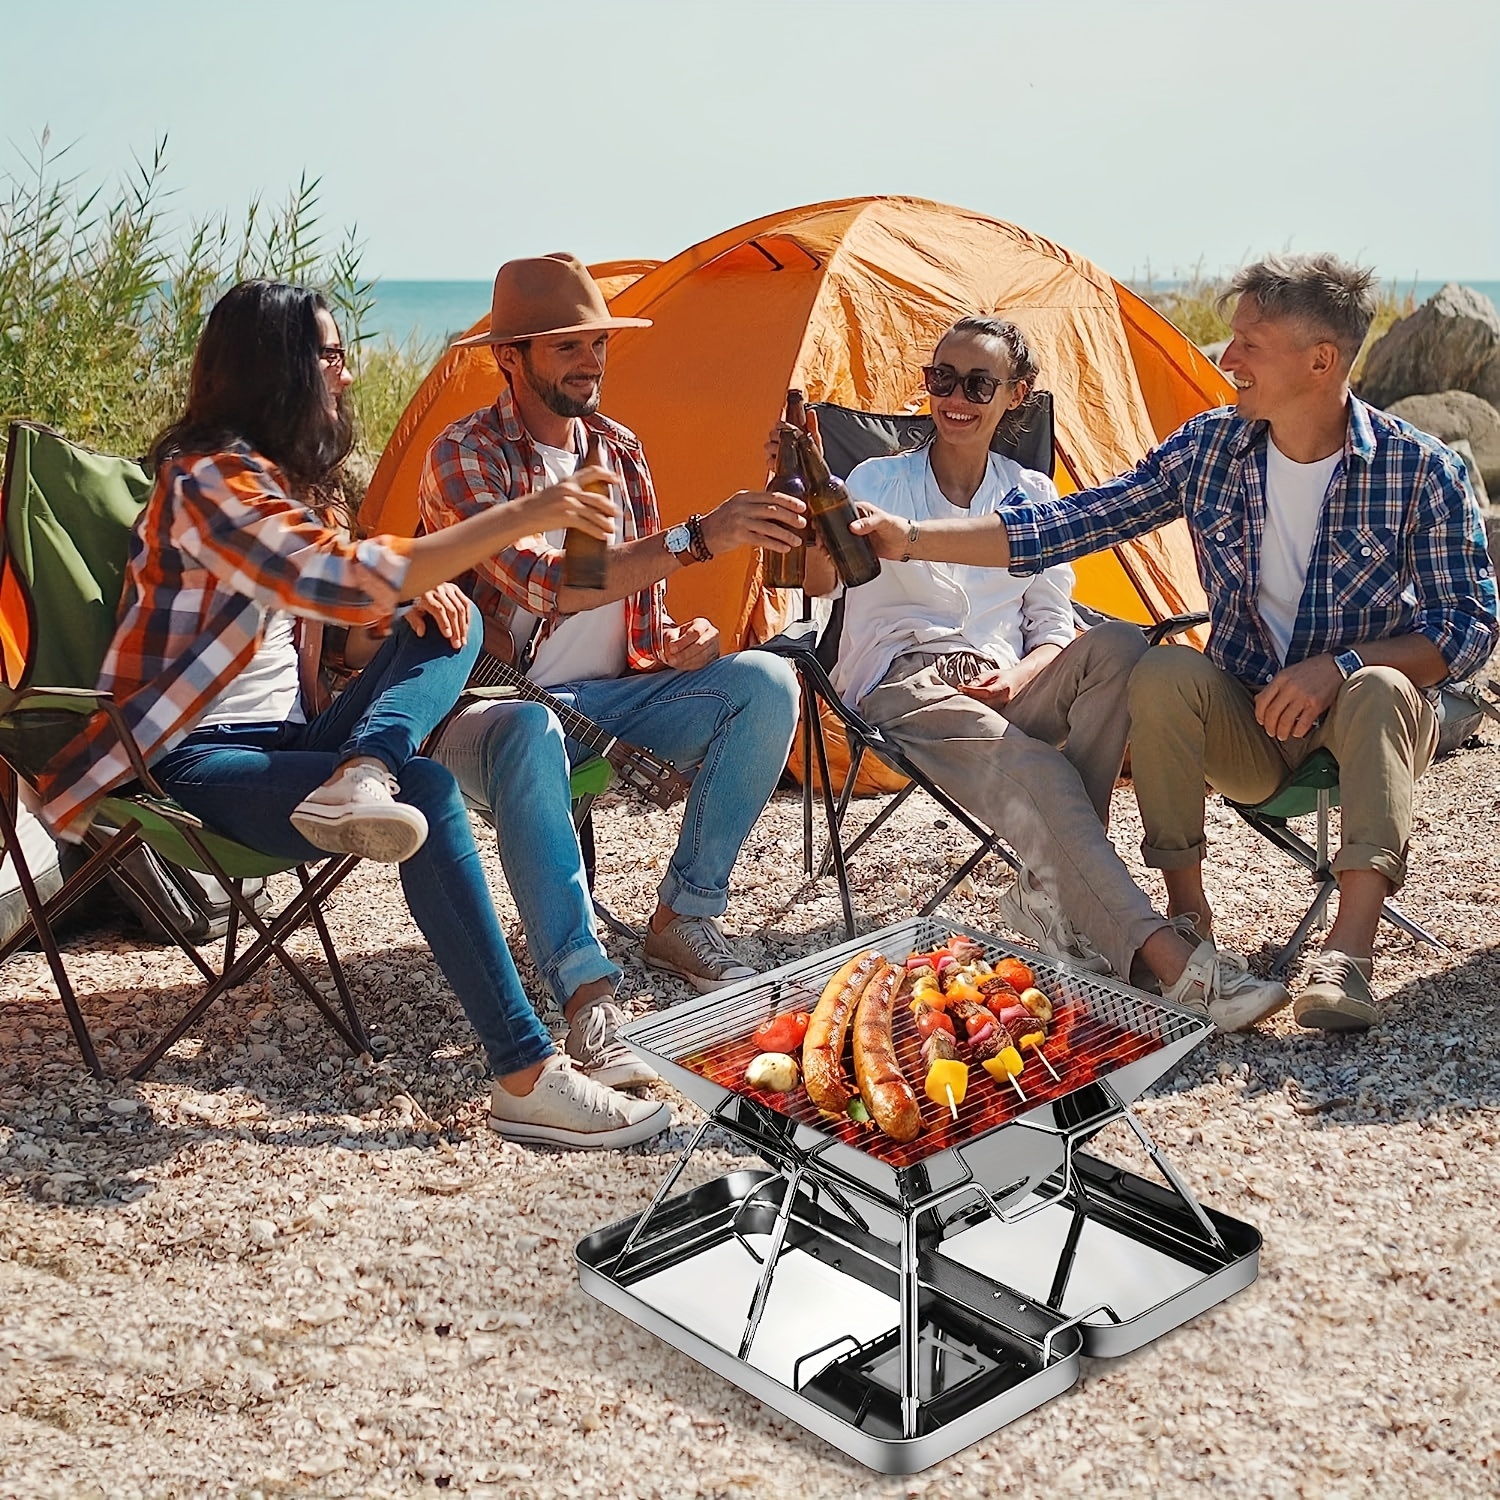 Charcoal Grill, BBQ Grill Folding Portable Lightweight smoker Grill,  Barbecue Grill Small desk Tabletop Outdoor Grill for Camping Picnics Garden  Beach